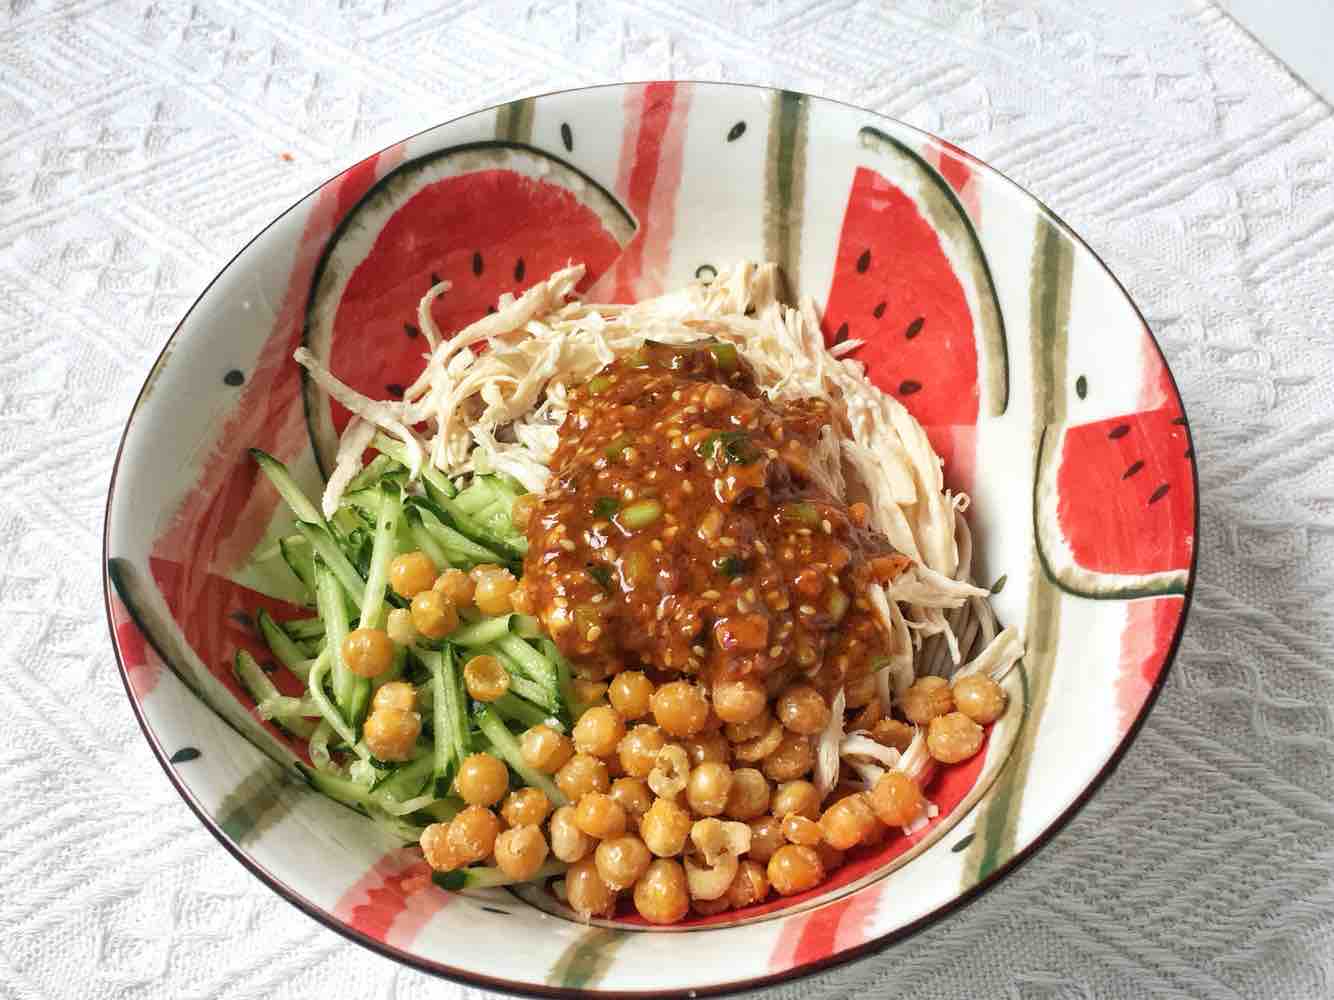 Noodles with Shredded Chicken and Sesame Sauce recipe